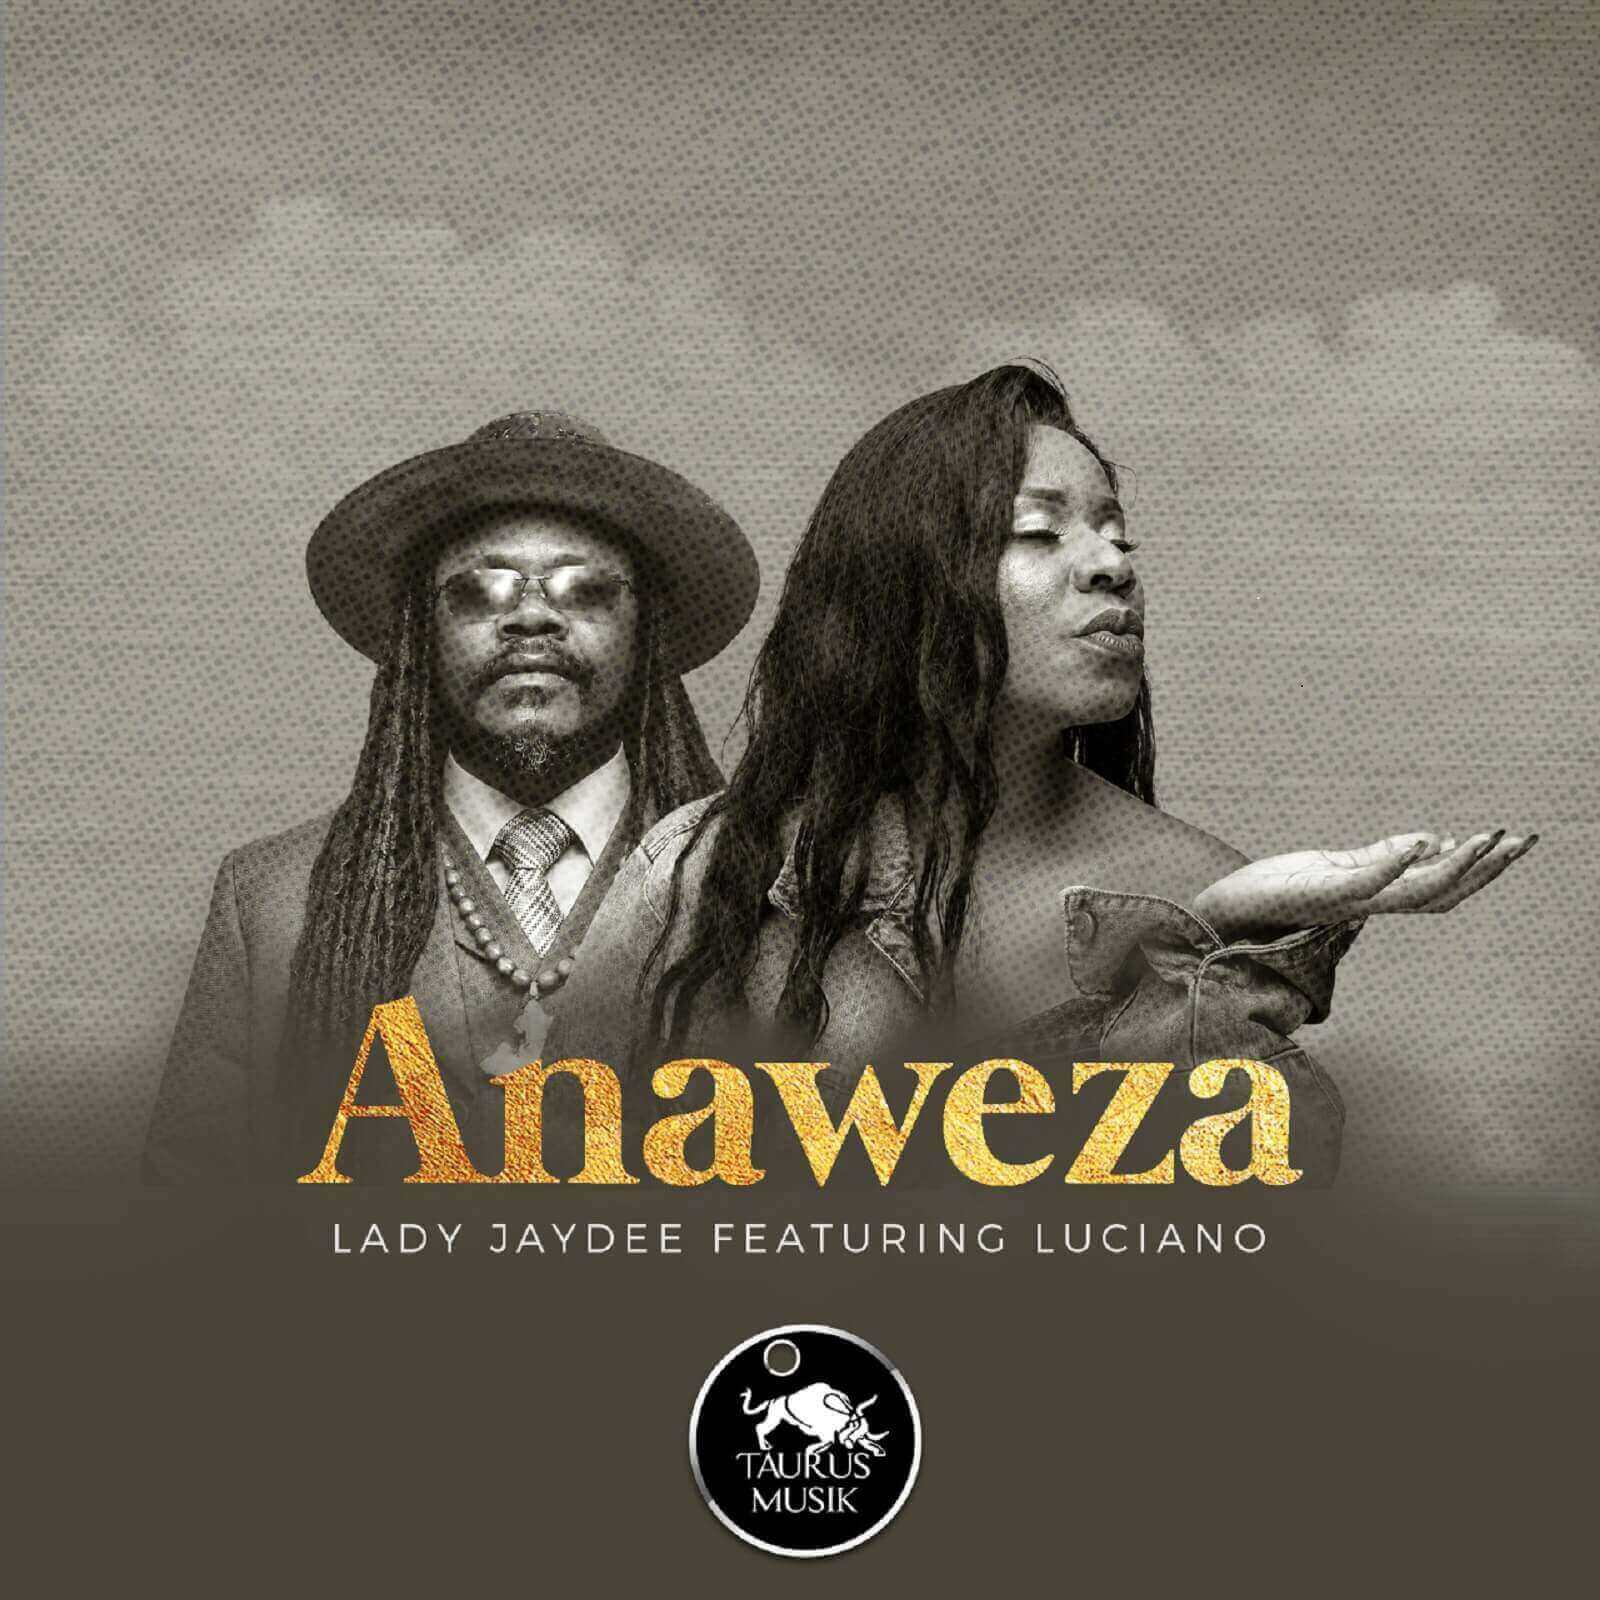 Tanzanian Songstress Lady Jaydee Collaborates With Jamaican Artist Luciano In New Song "Anaweza"